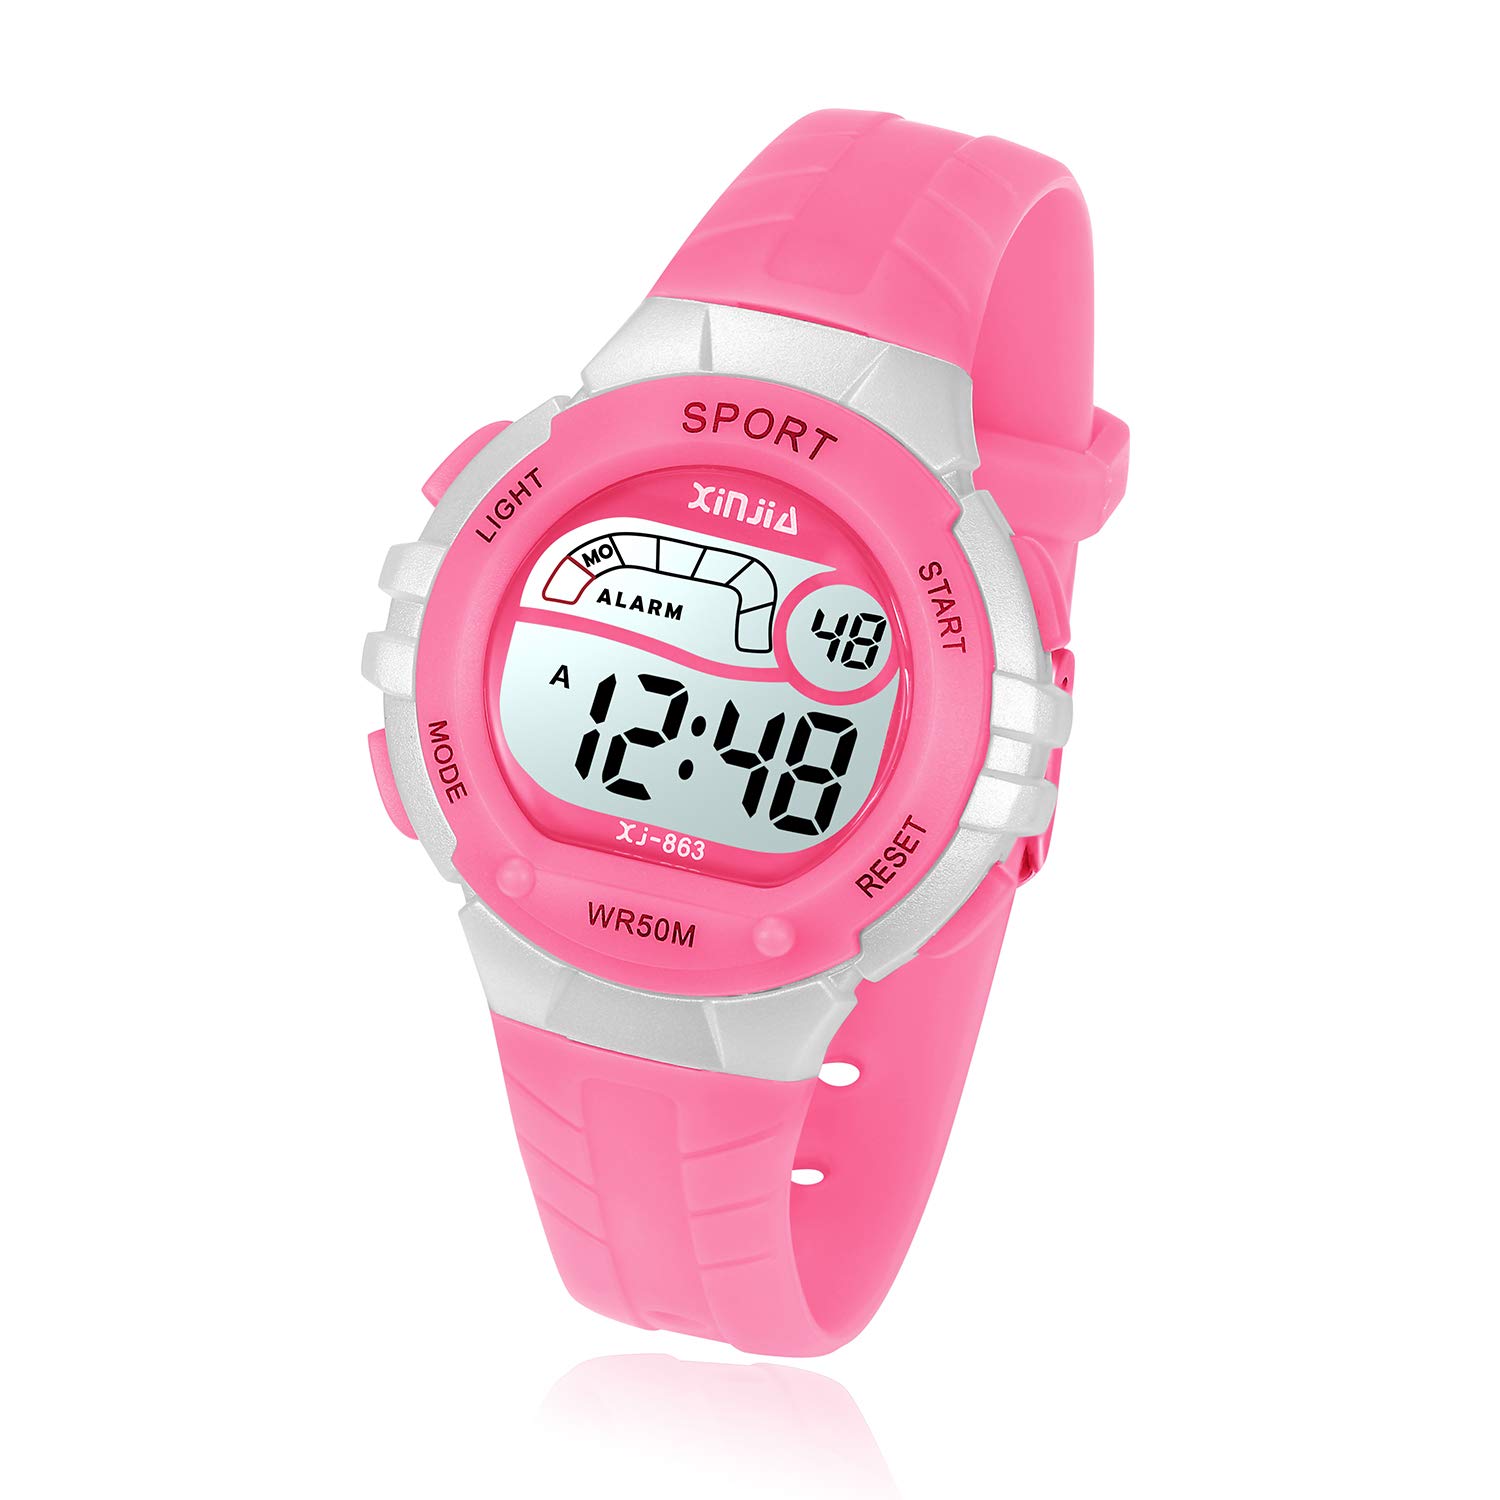 Kids Watch Digital for Girls Boys,Children Watches Waterproof Multi-Functional with Alarm/Stopwatch Soft Strap WristWatches for Kids Toddler Girls Boys Ages 4-12